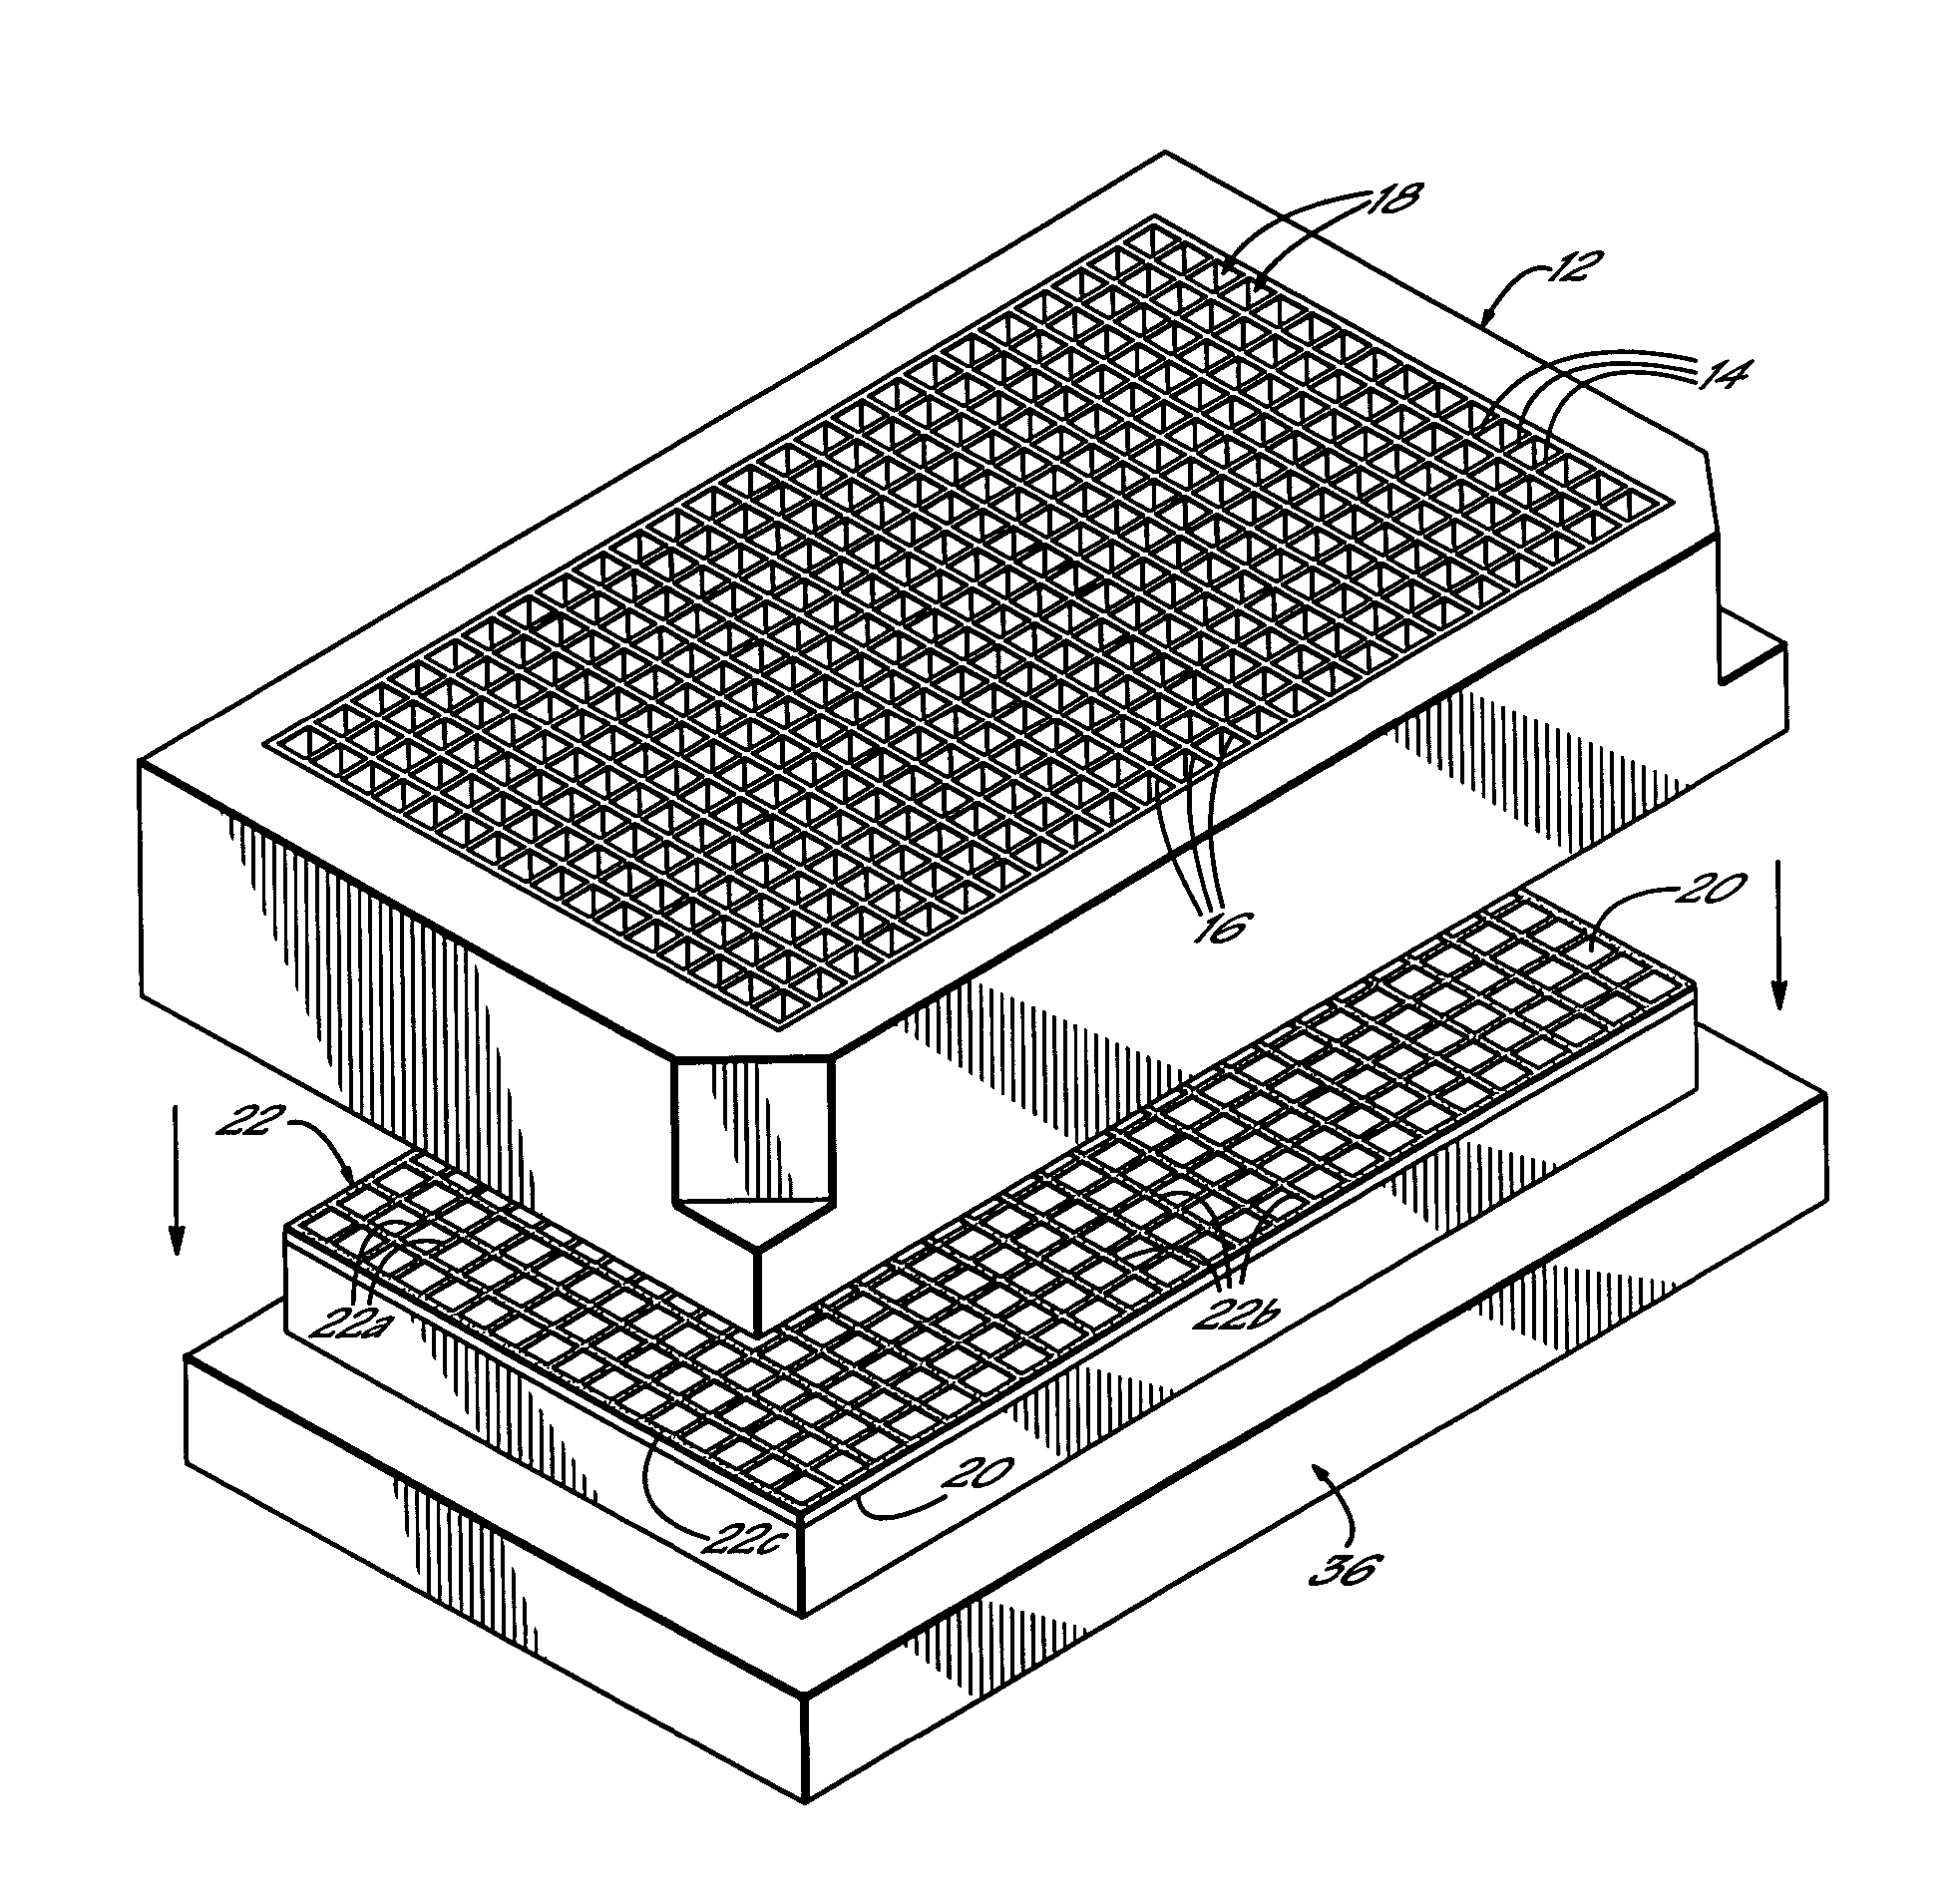 Method of making a multi-well test plate having adhesively secured transparent bottom panel